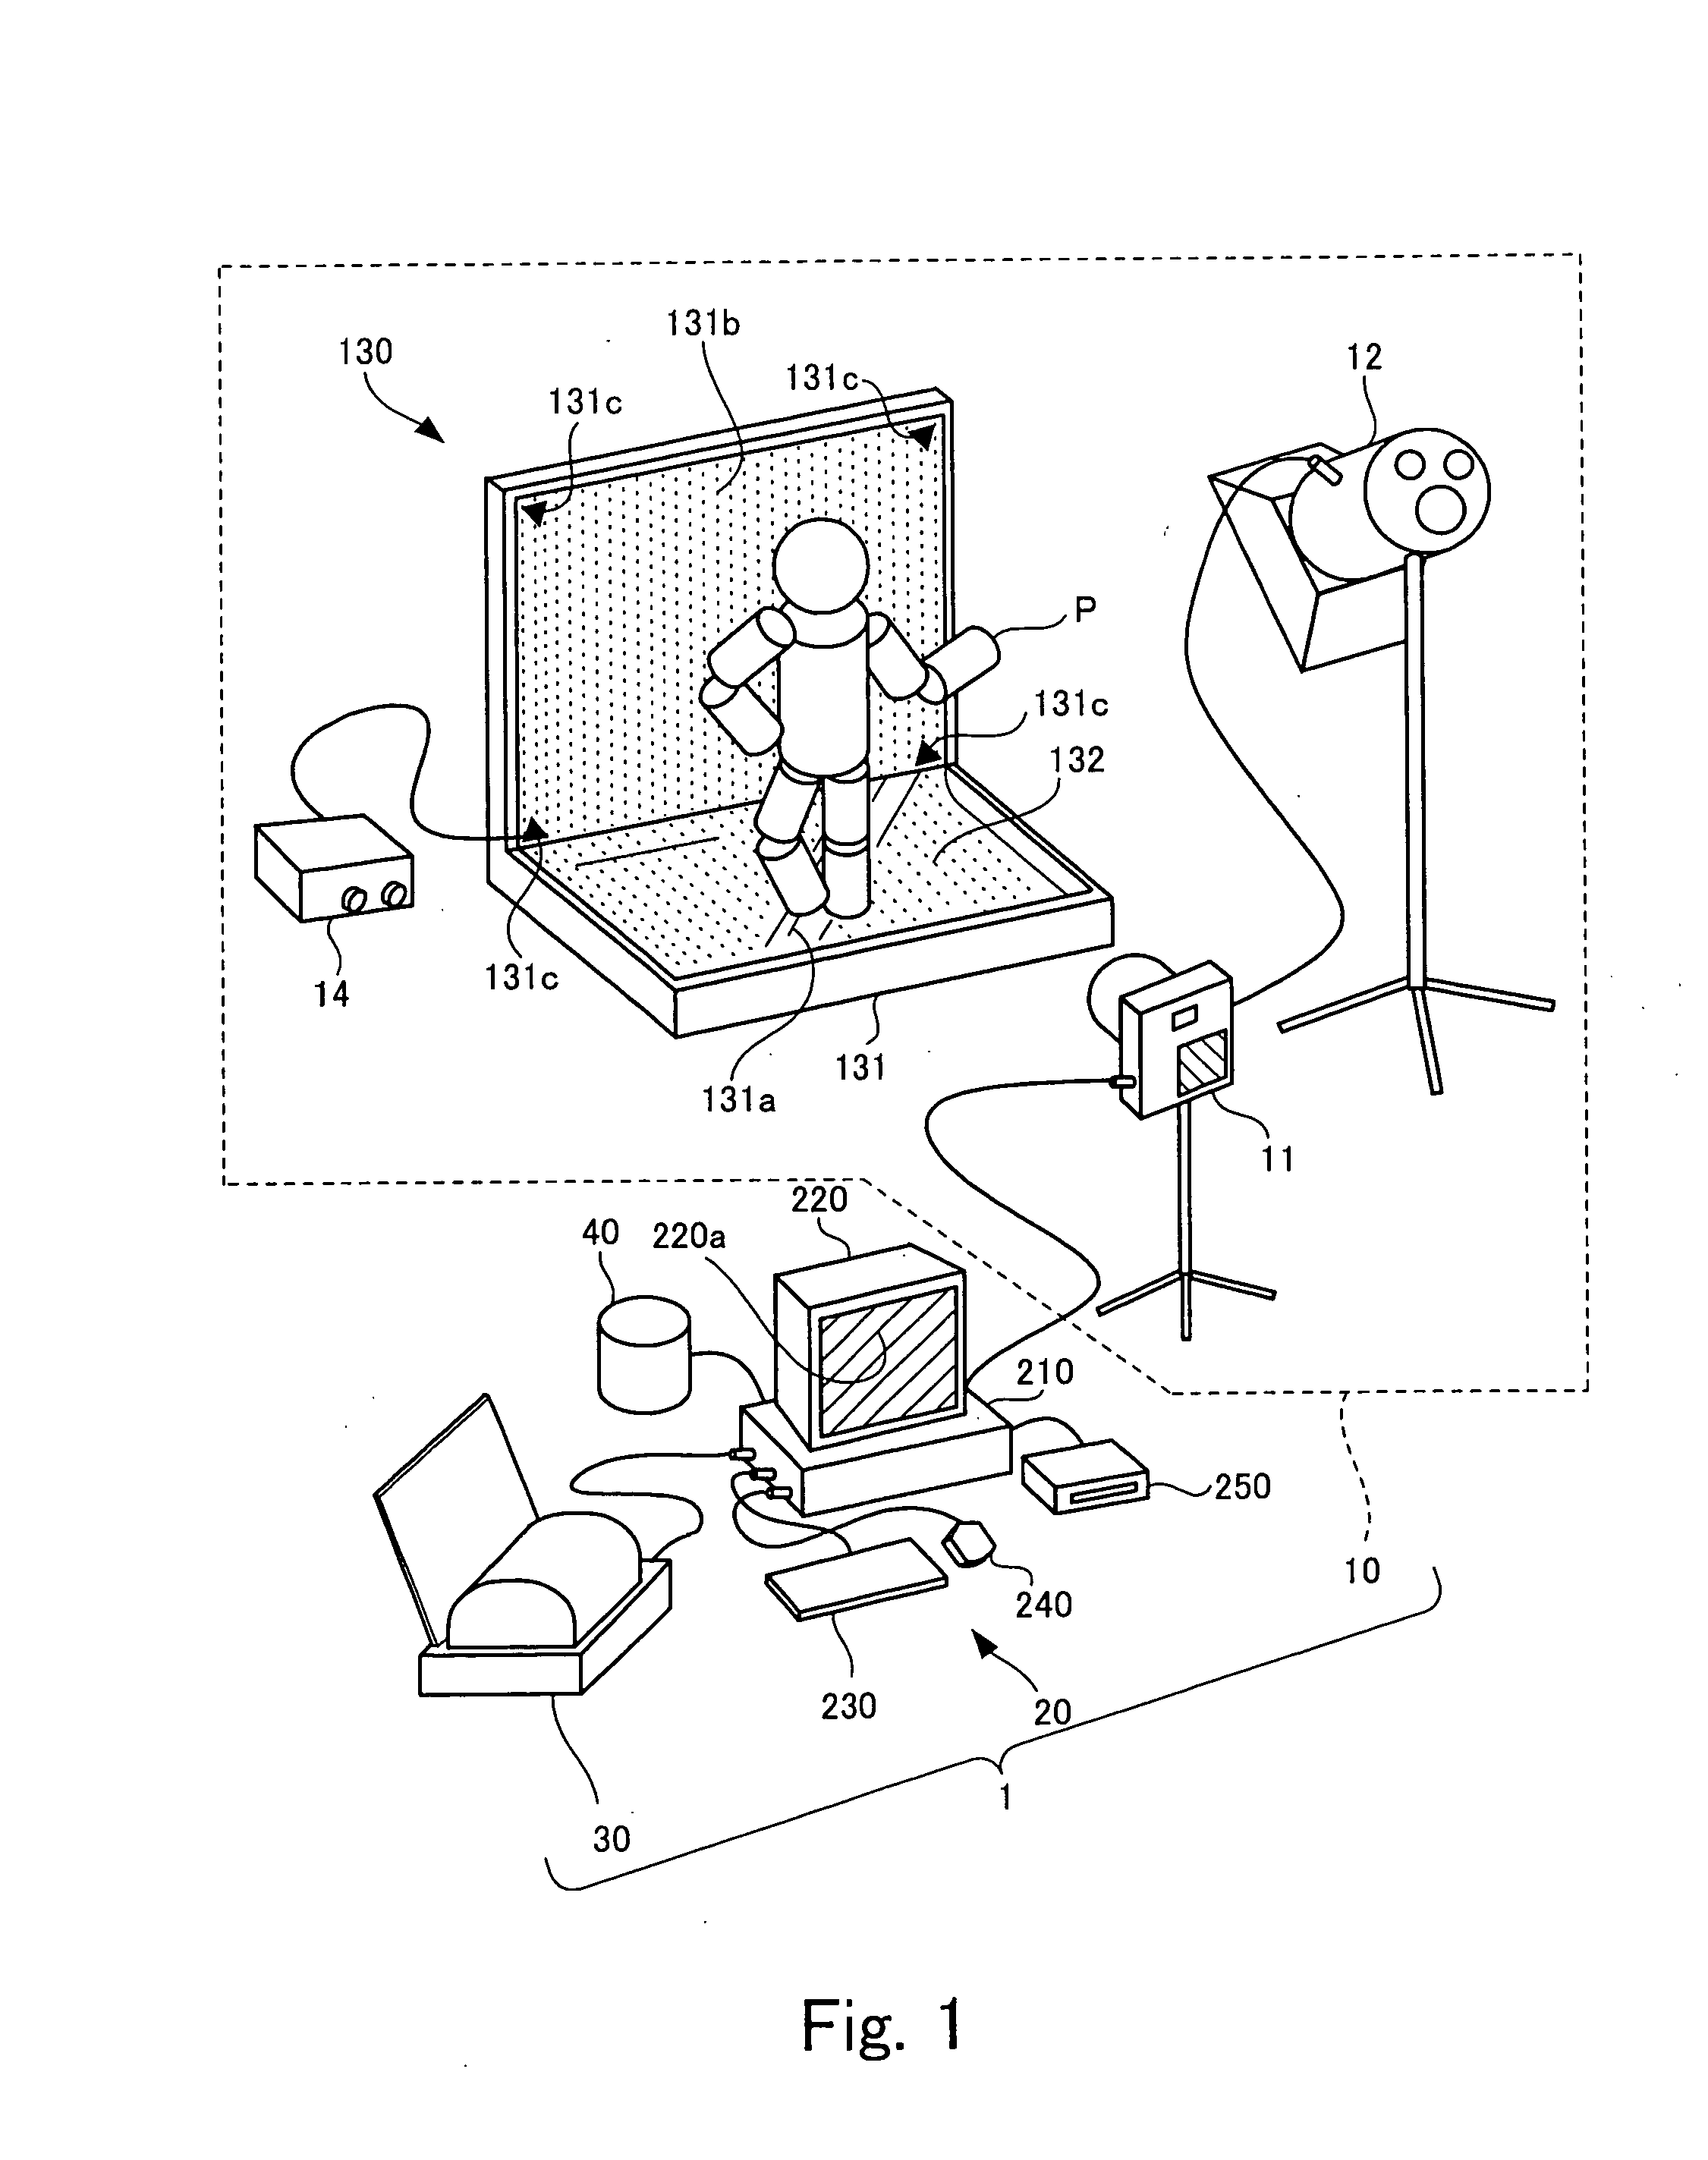 Background Replacing Apparatus, Background Replacing Program, and Background Replacing Method